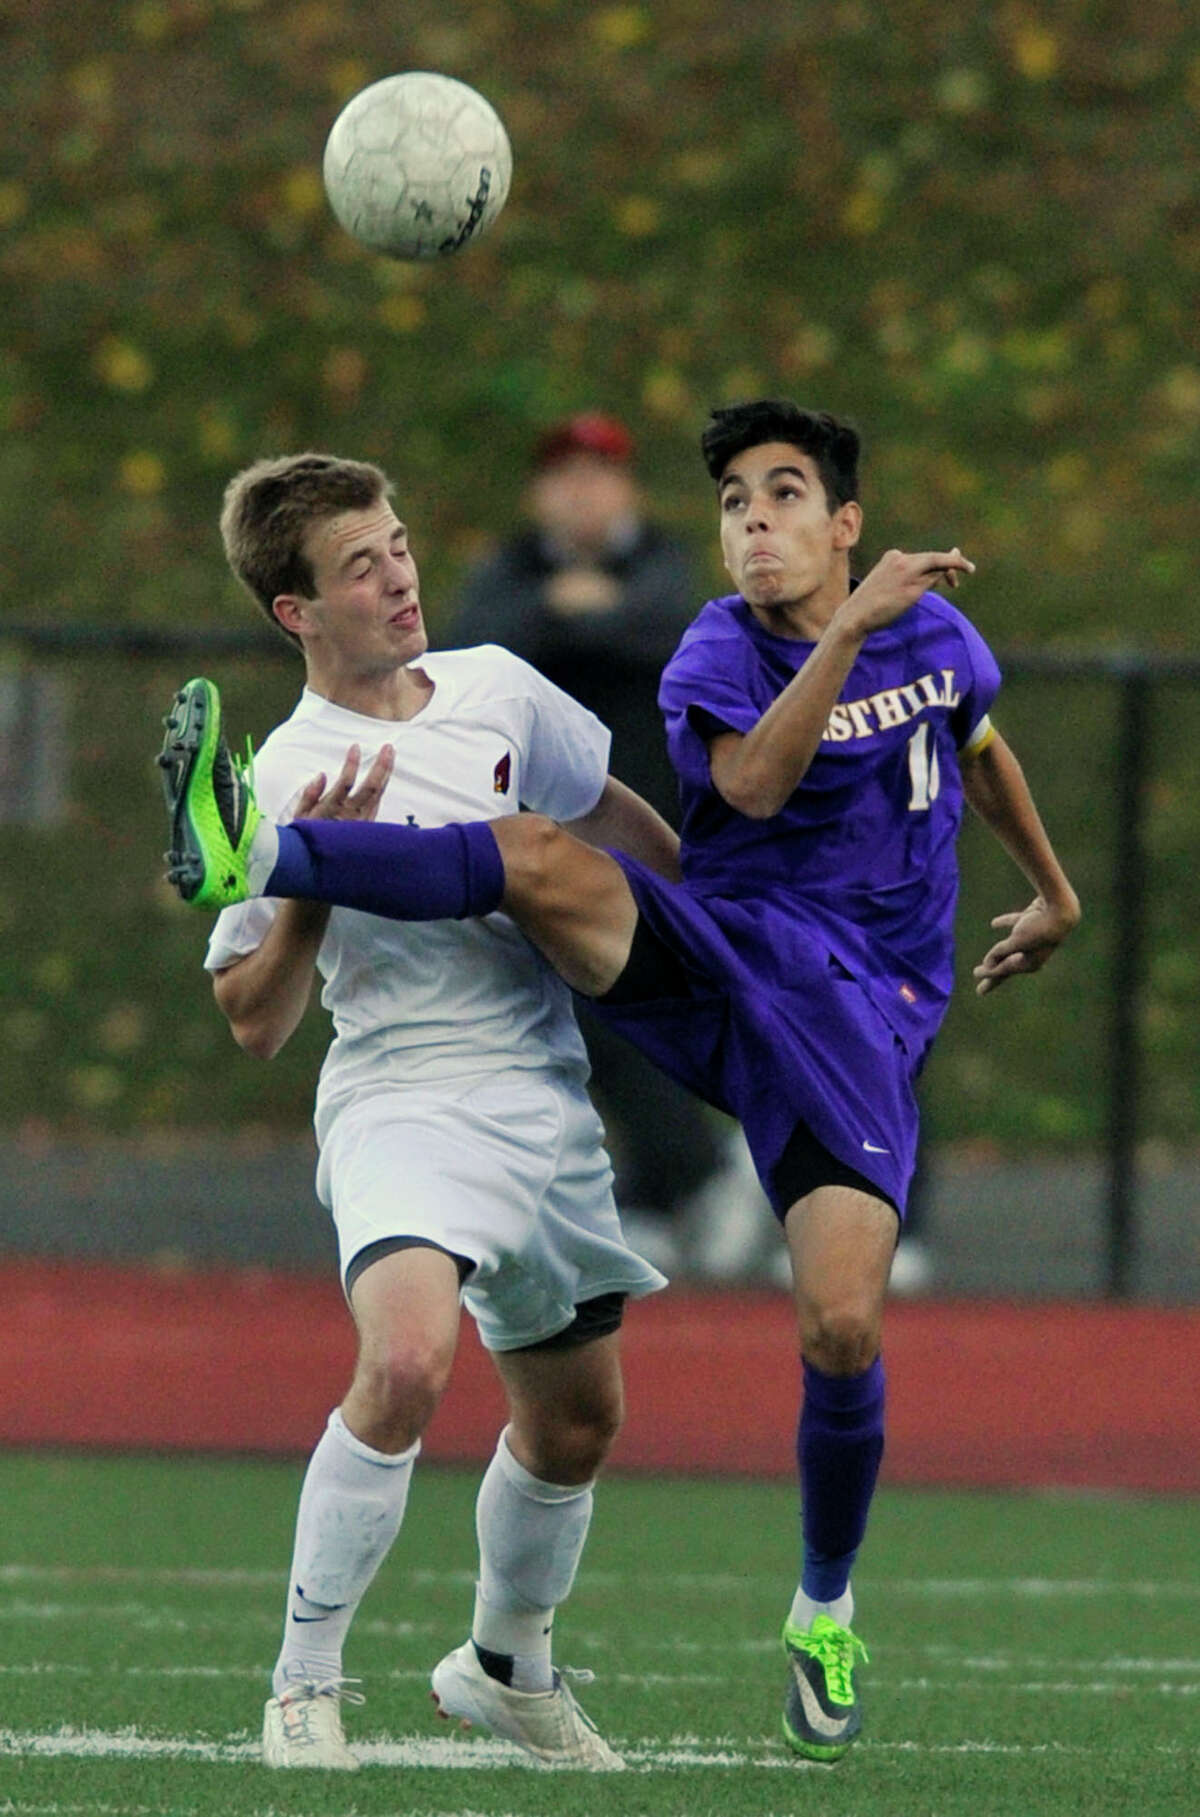 (9) In a soccer world filled with players recognized by one name only, Westhill's Filosmar Cordeiro would fit right in with the likes of Messi, Renaldino, and Beckham. Filosmar's name matches the skill level of the player who earned a spot on the Hearst Super 15 boys soccer team.